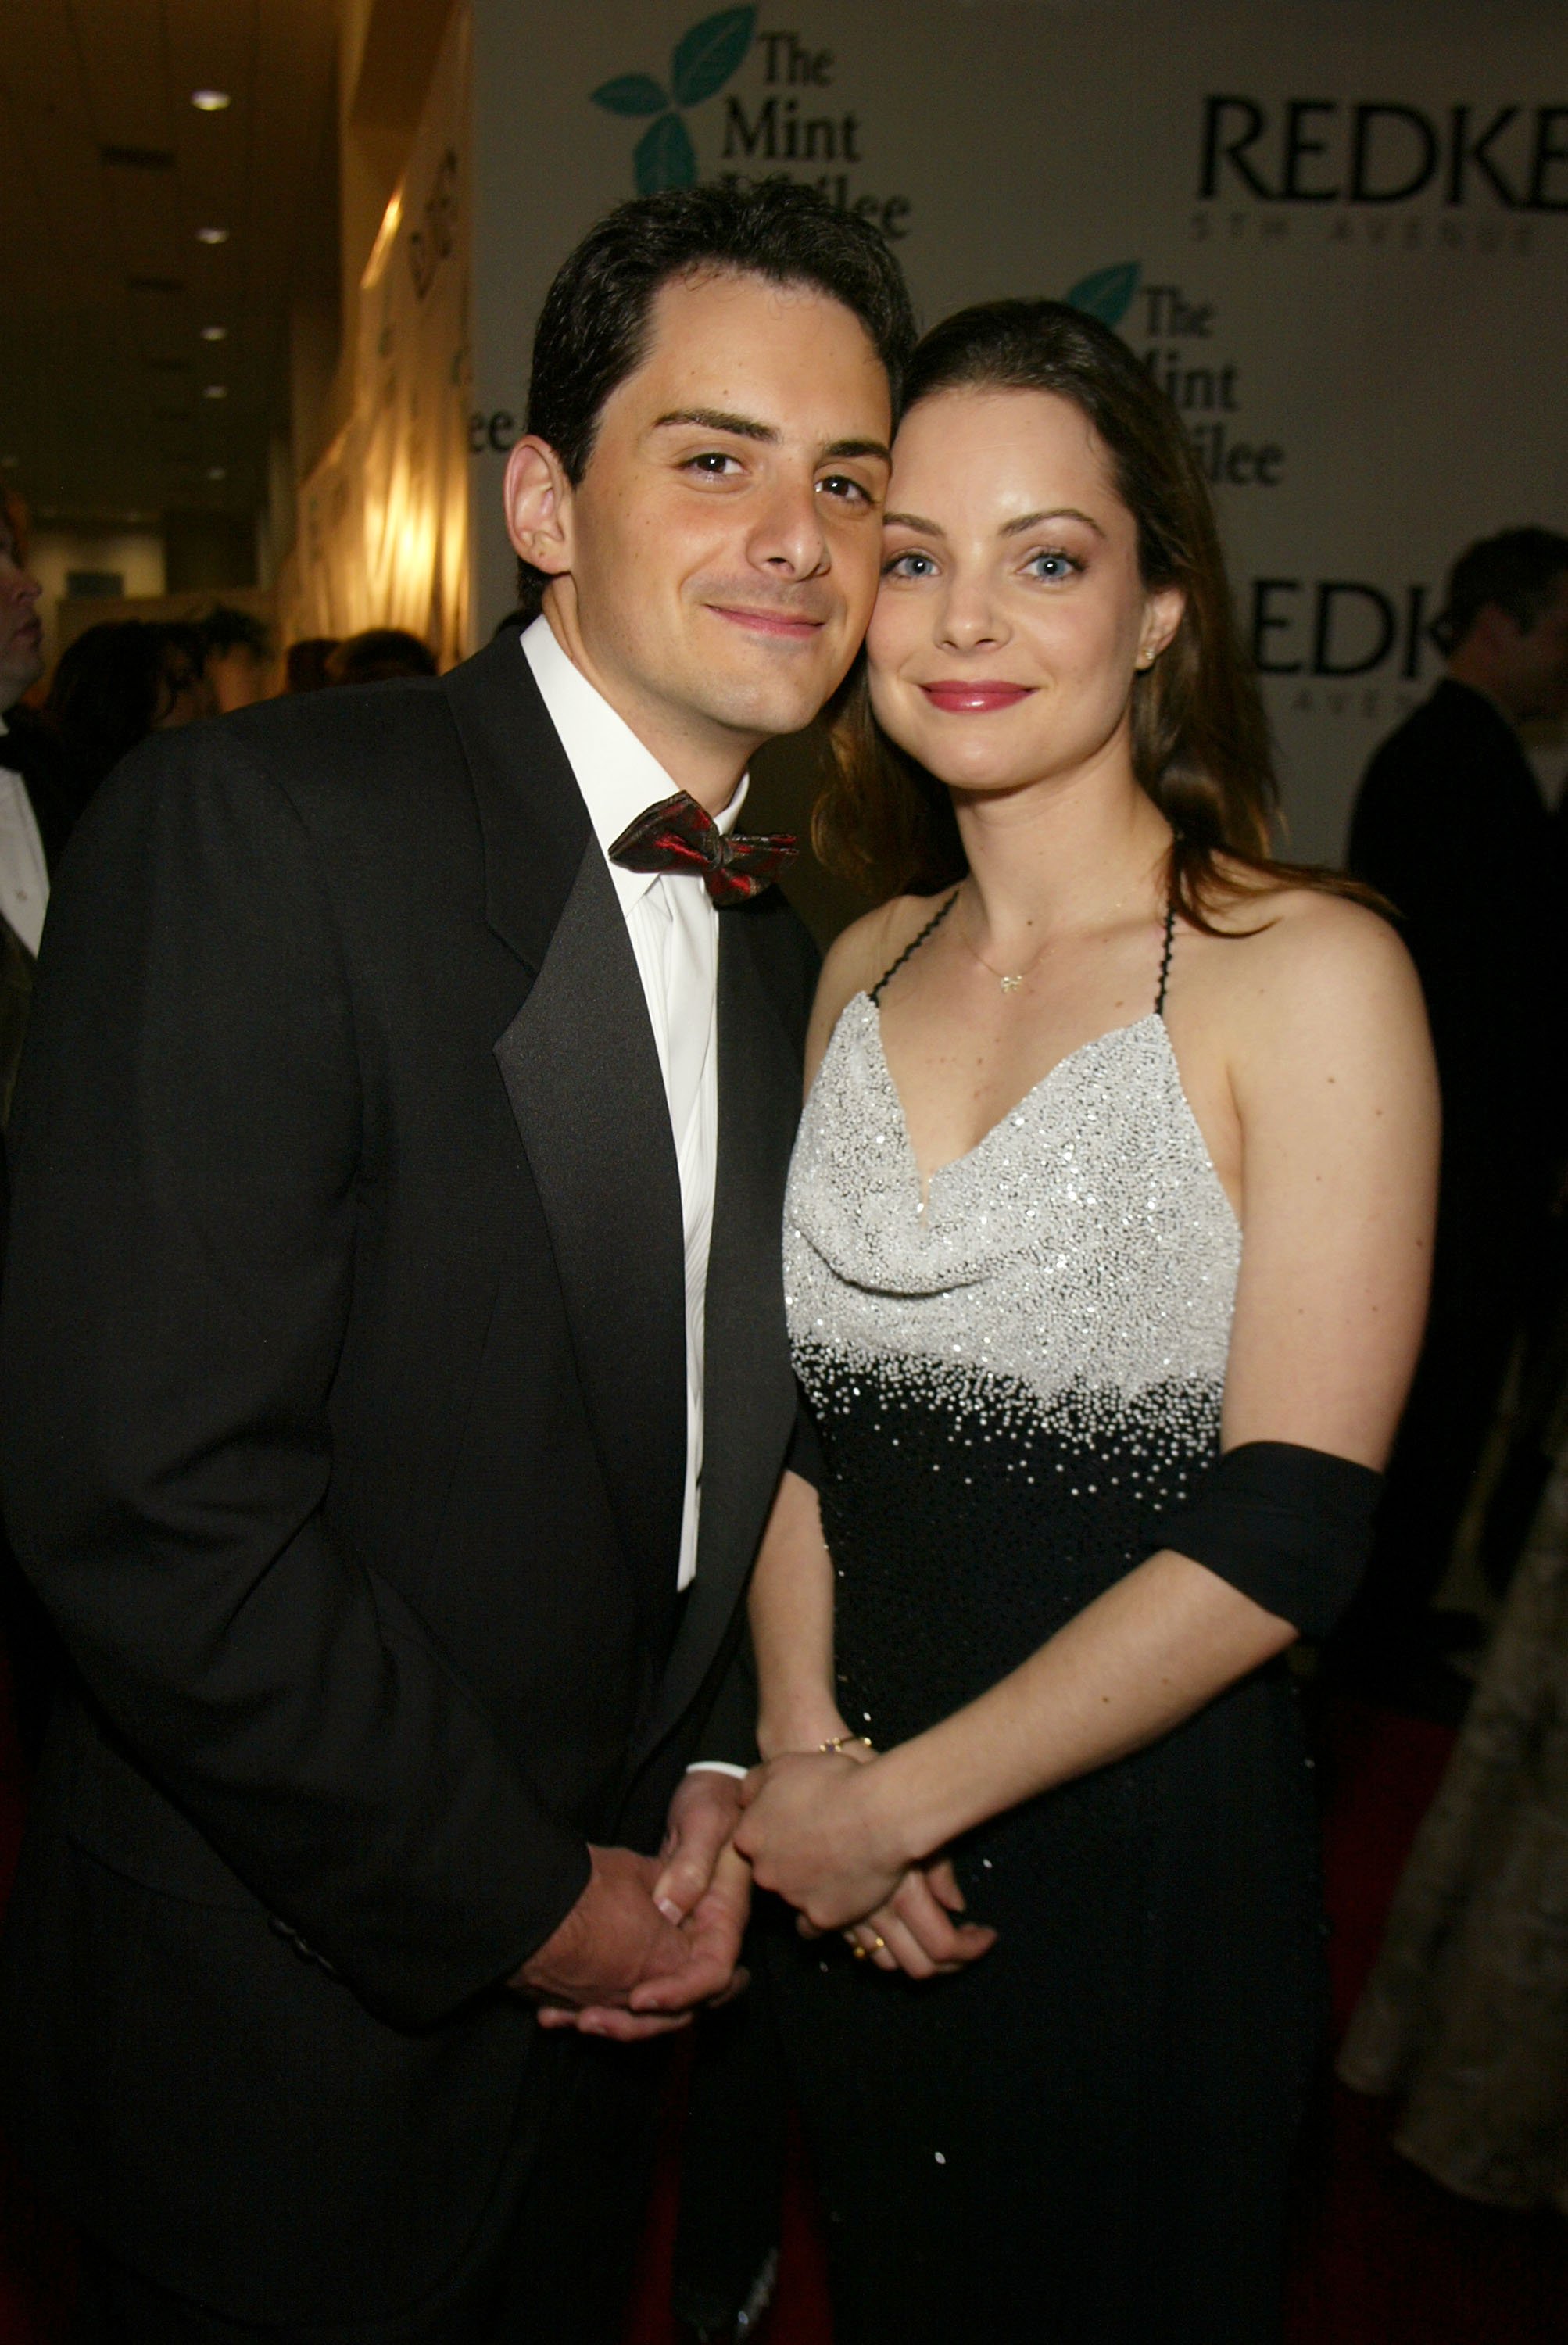 Brad Paisley and Kimberly Williams at "The 6th Annual Mint Jubilee" in Louisville, Kentucky on May 3, 2002. | Source: Getty Images